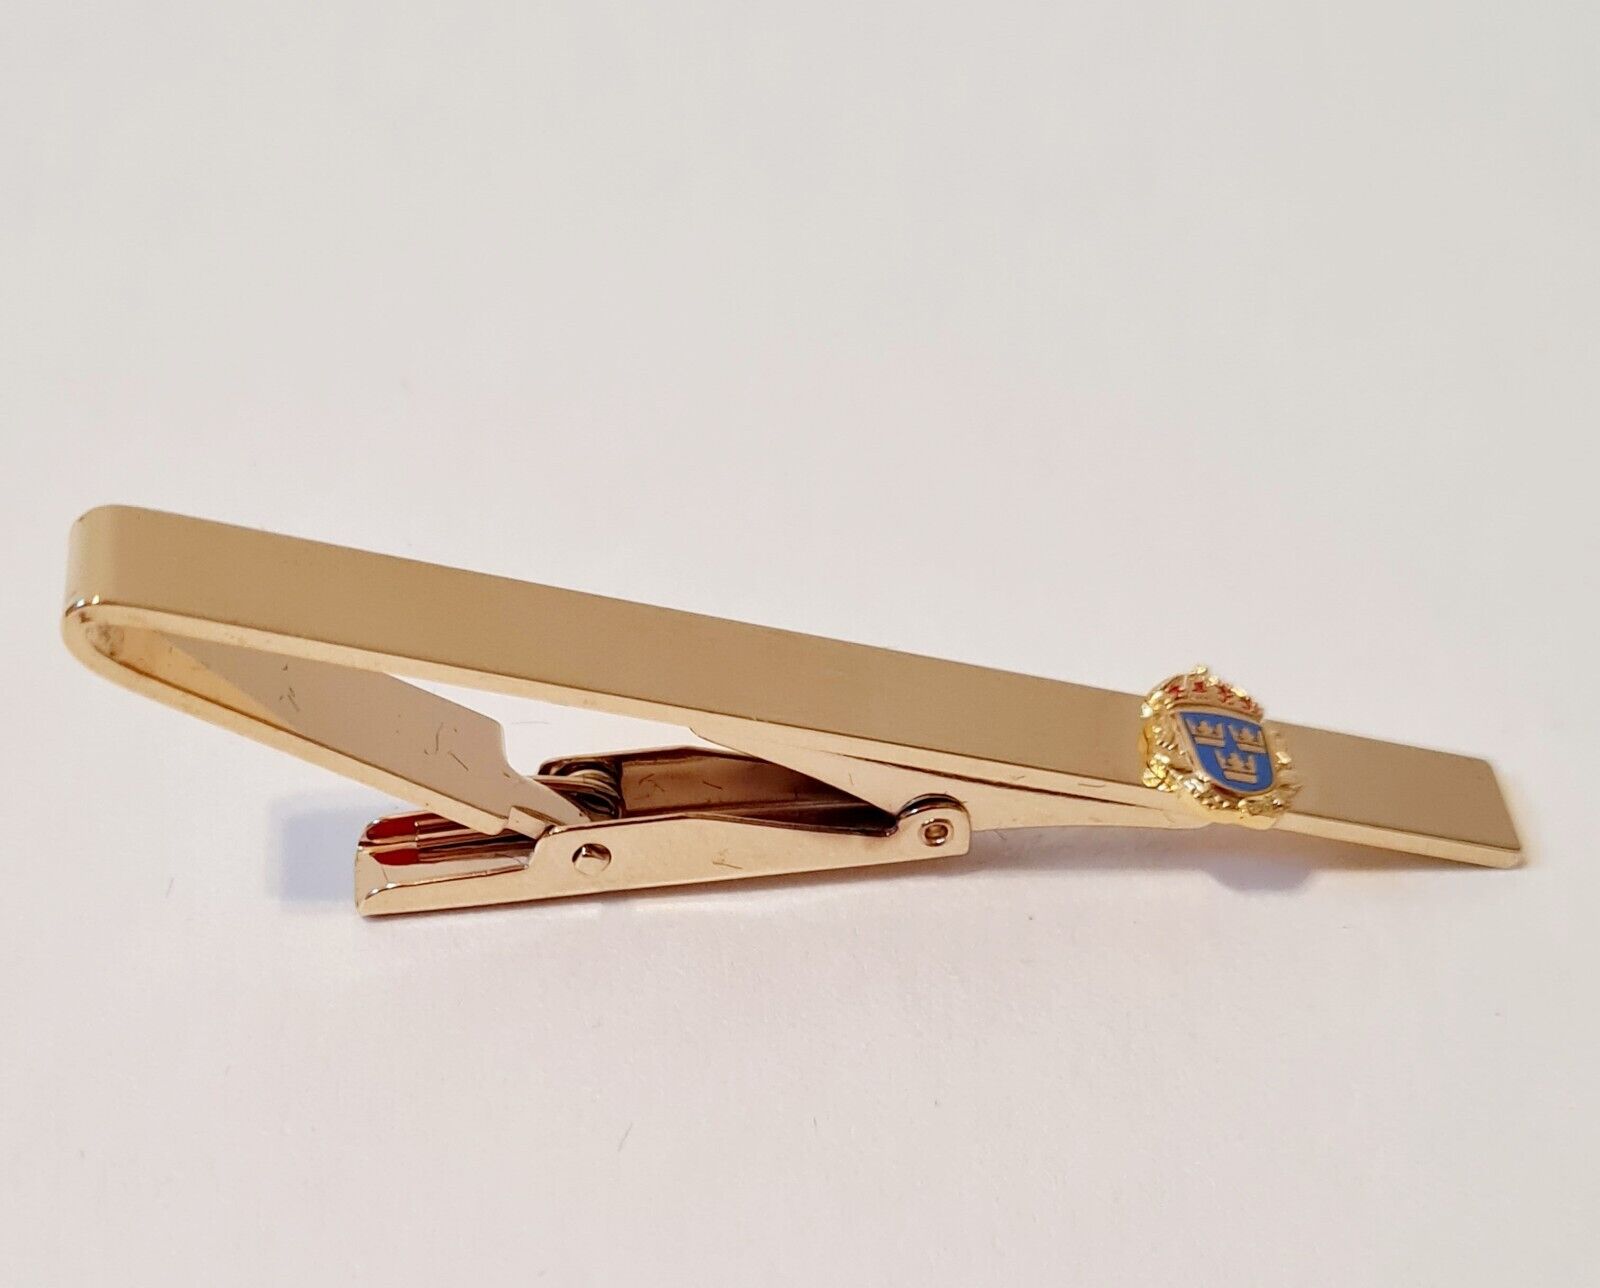 Gold tie pin classic - Shop online